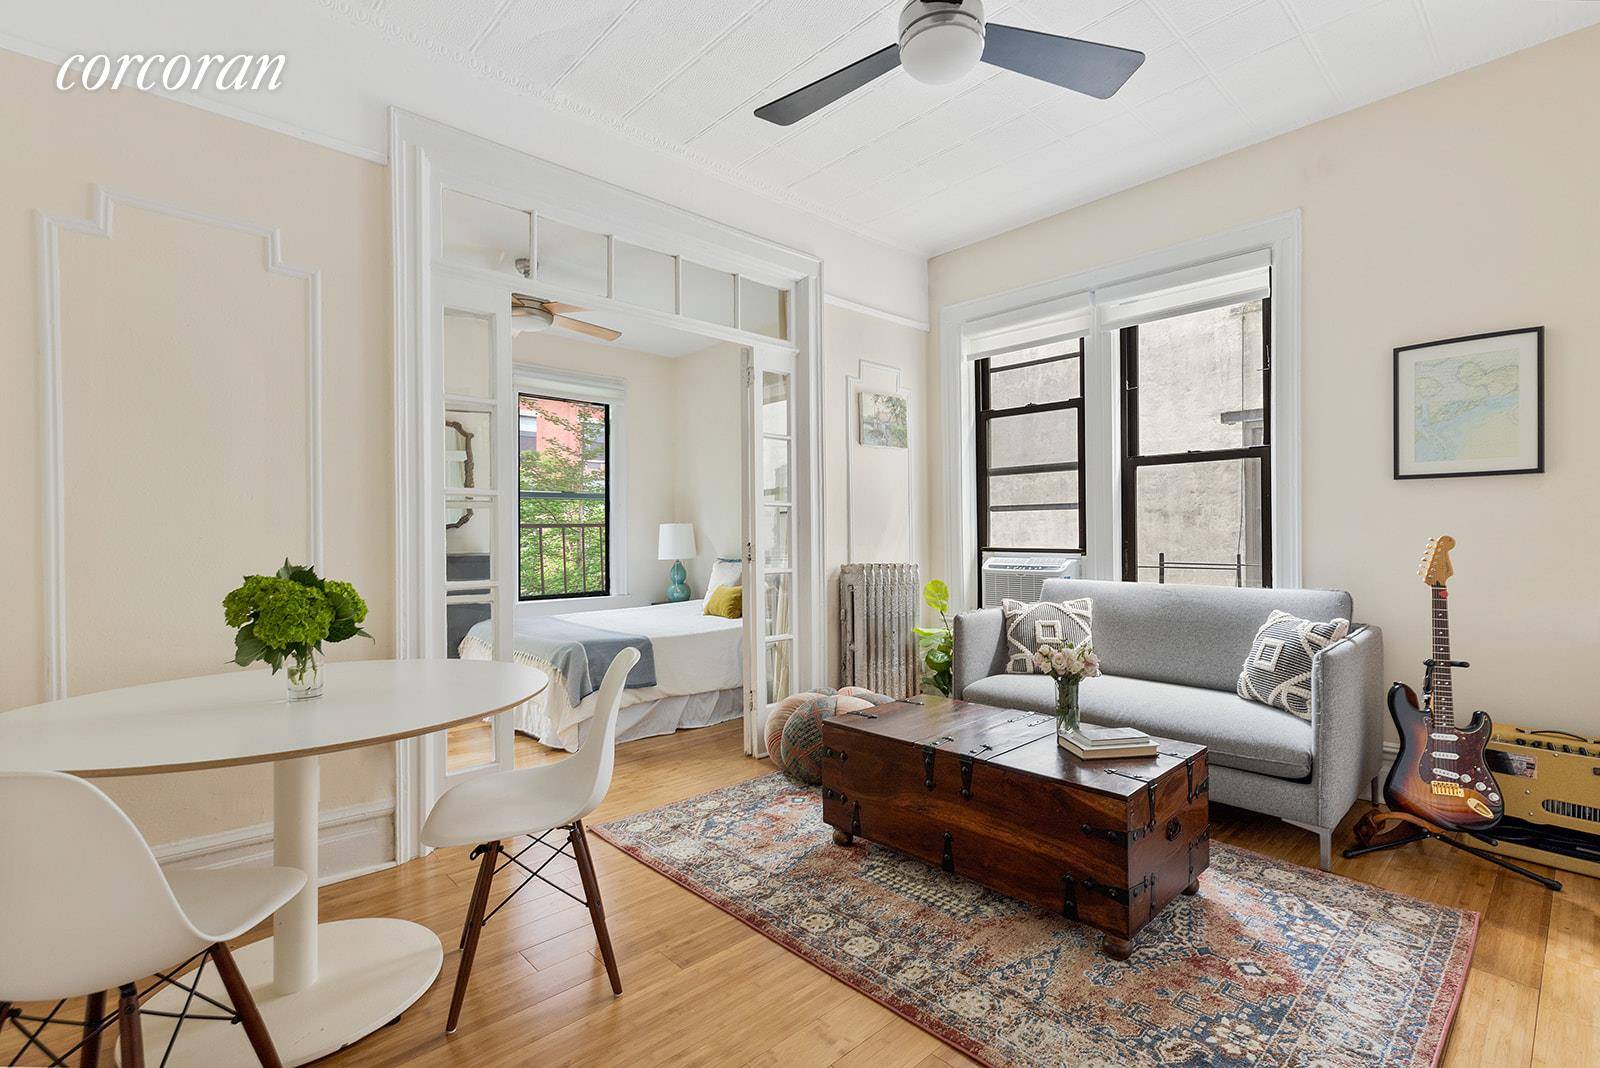 Bright and quiet, this classic pre war two bedroom coop is only one flight up, and one block from both Prospect Park and the F G train stop.